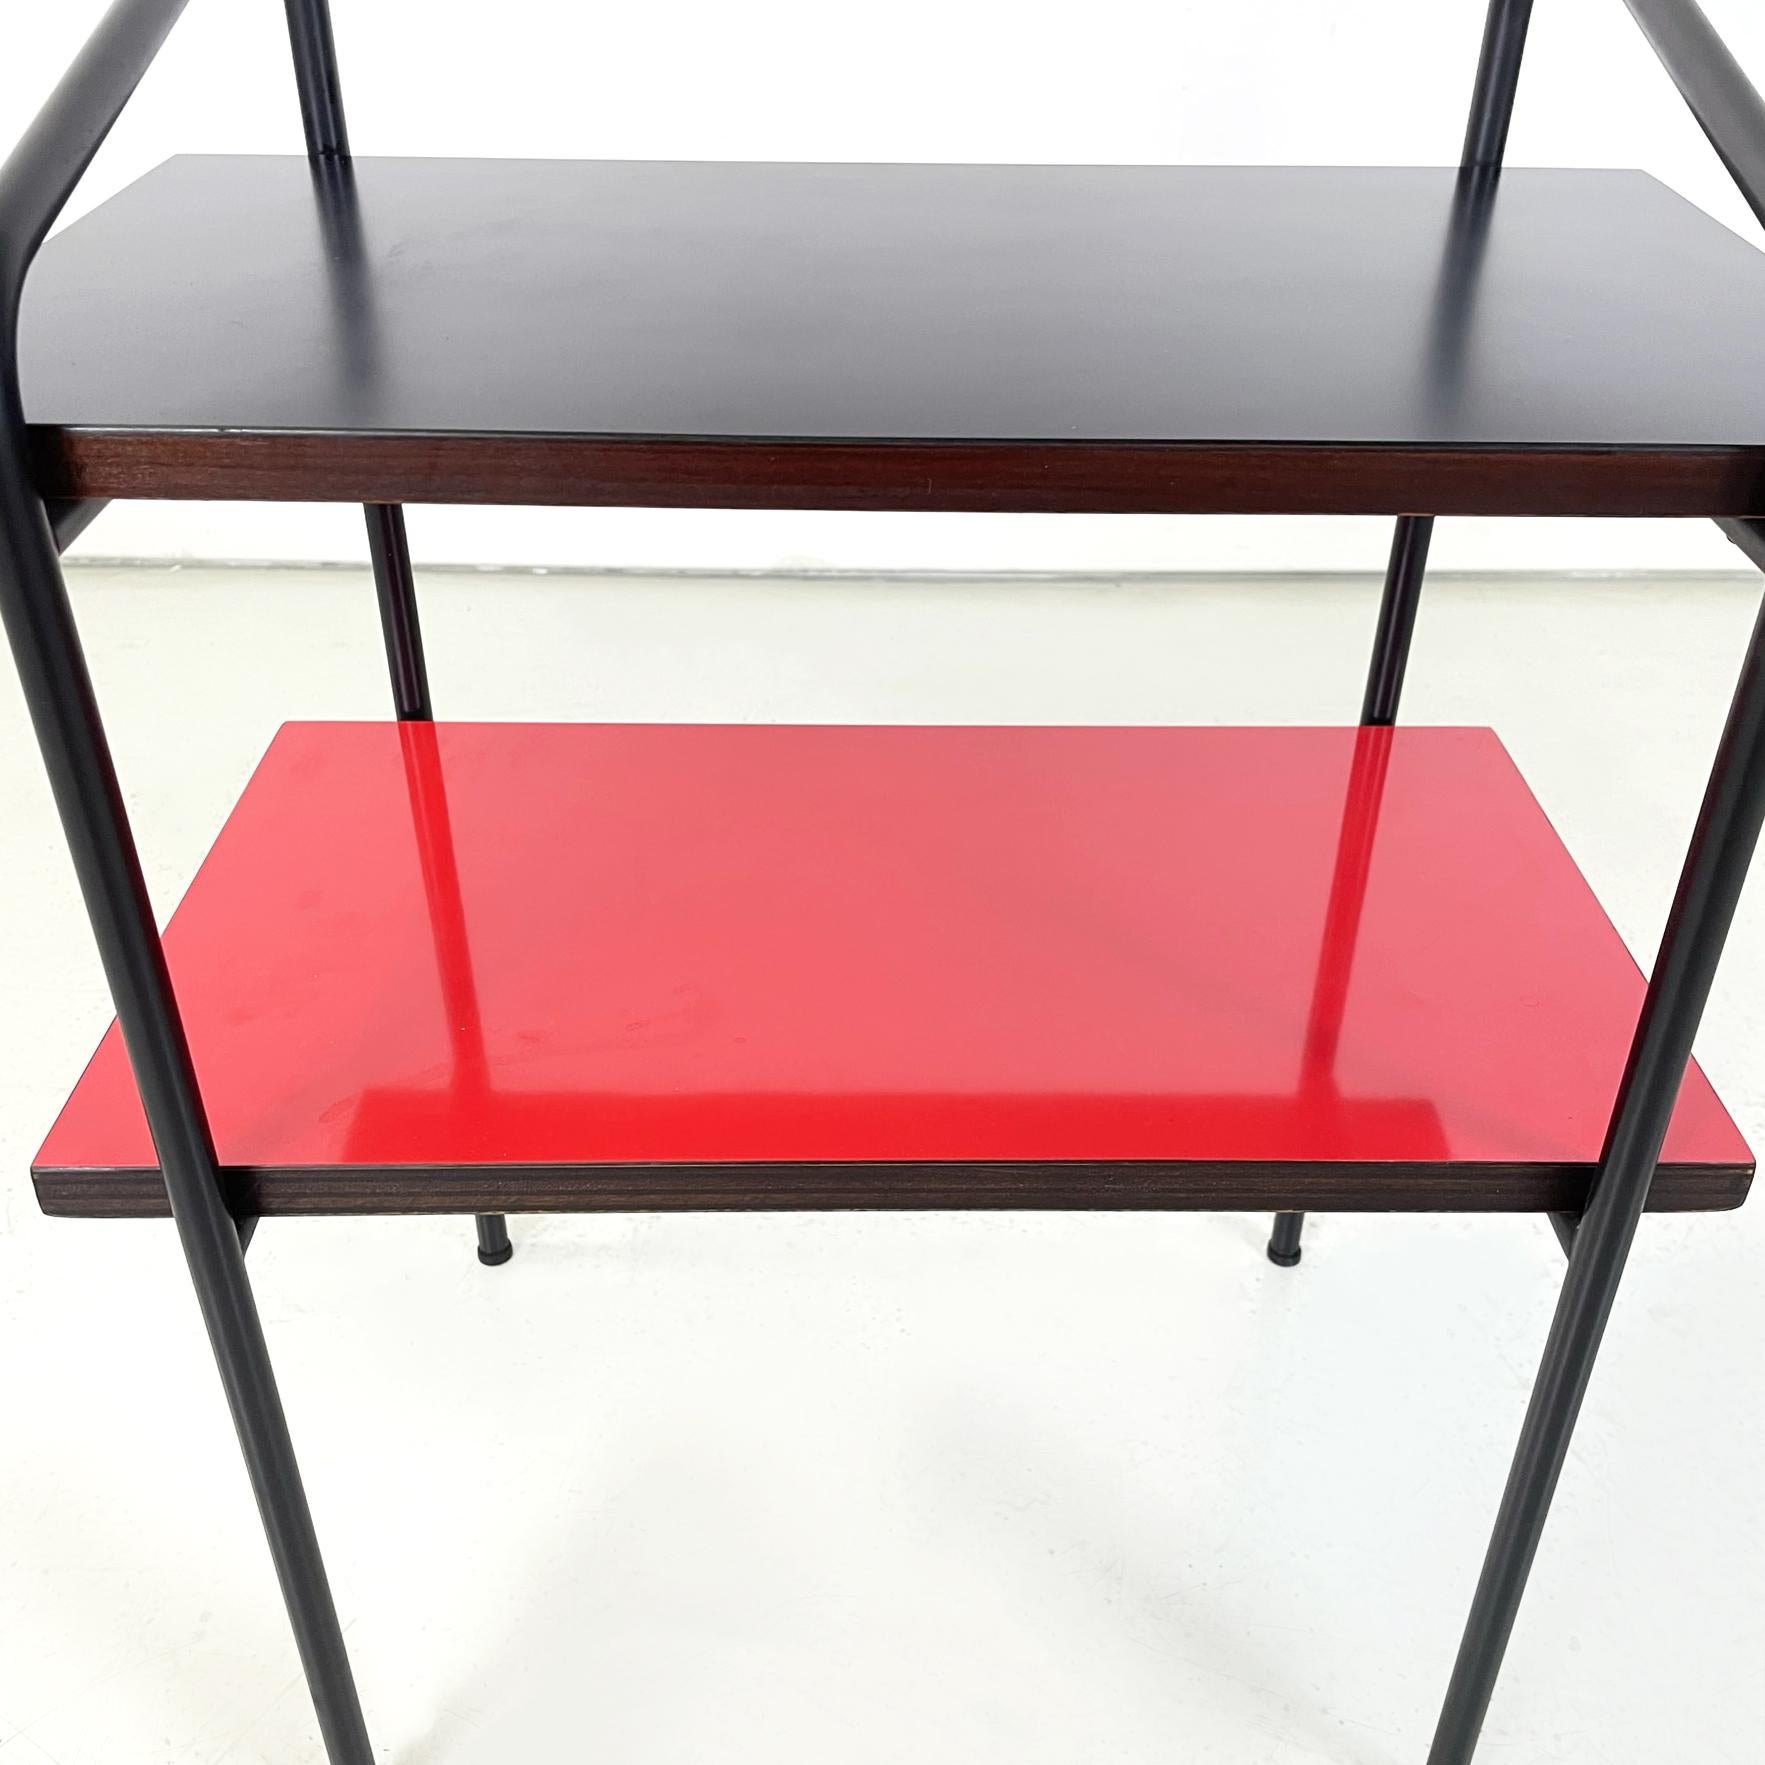 Metal Italian modern Coffee table bedside table in formica red black metal 1960s For Sale